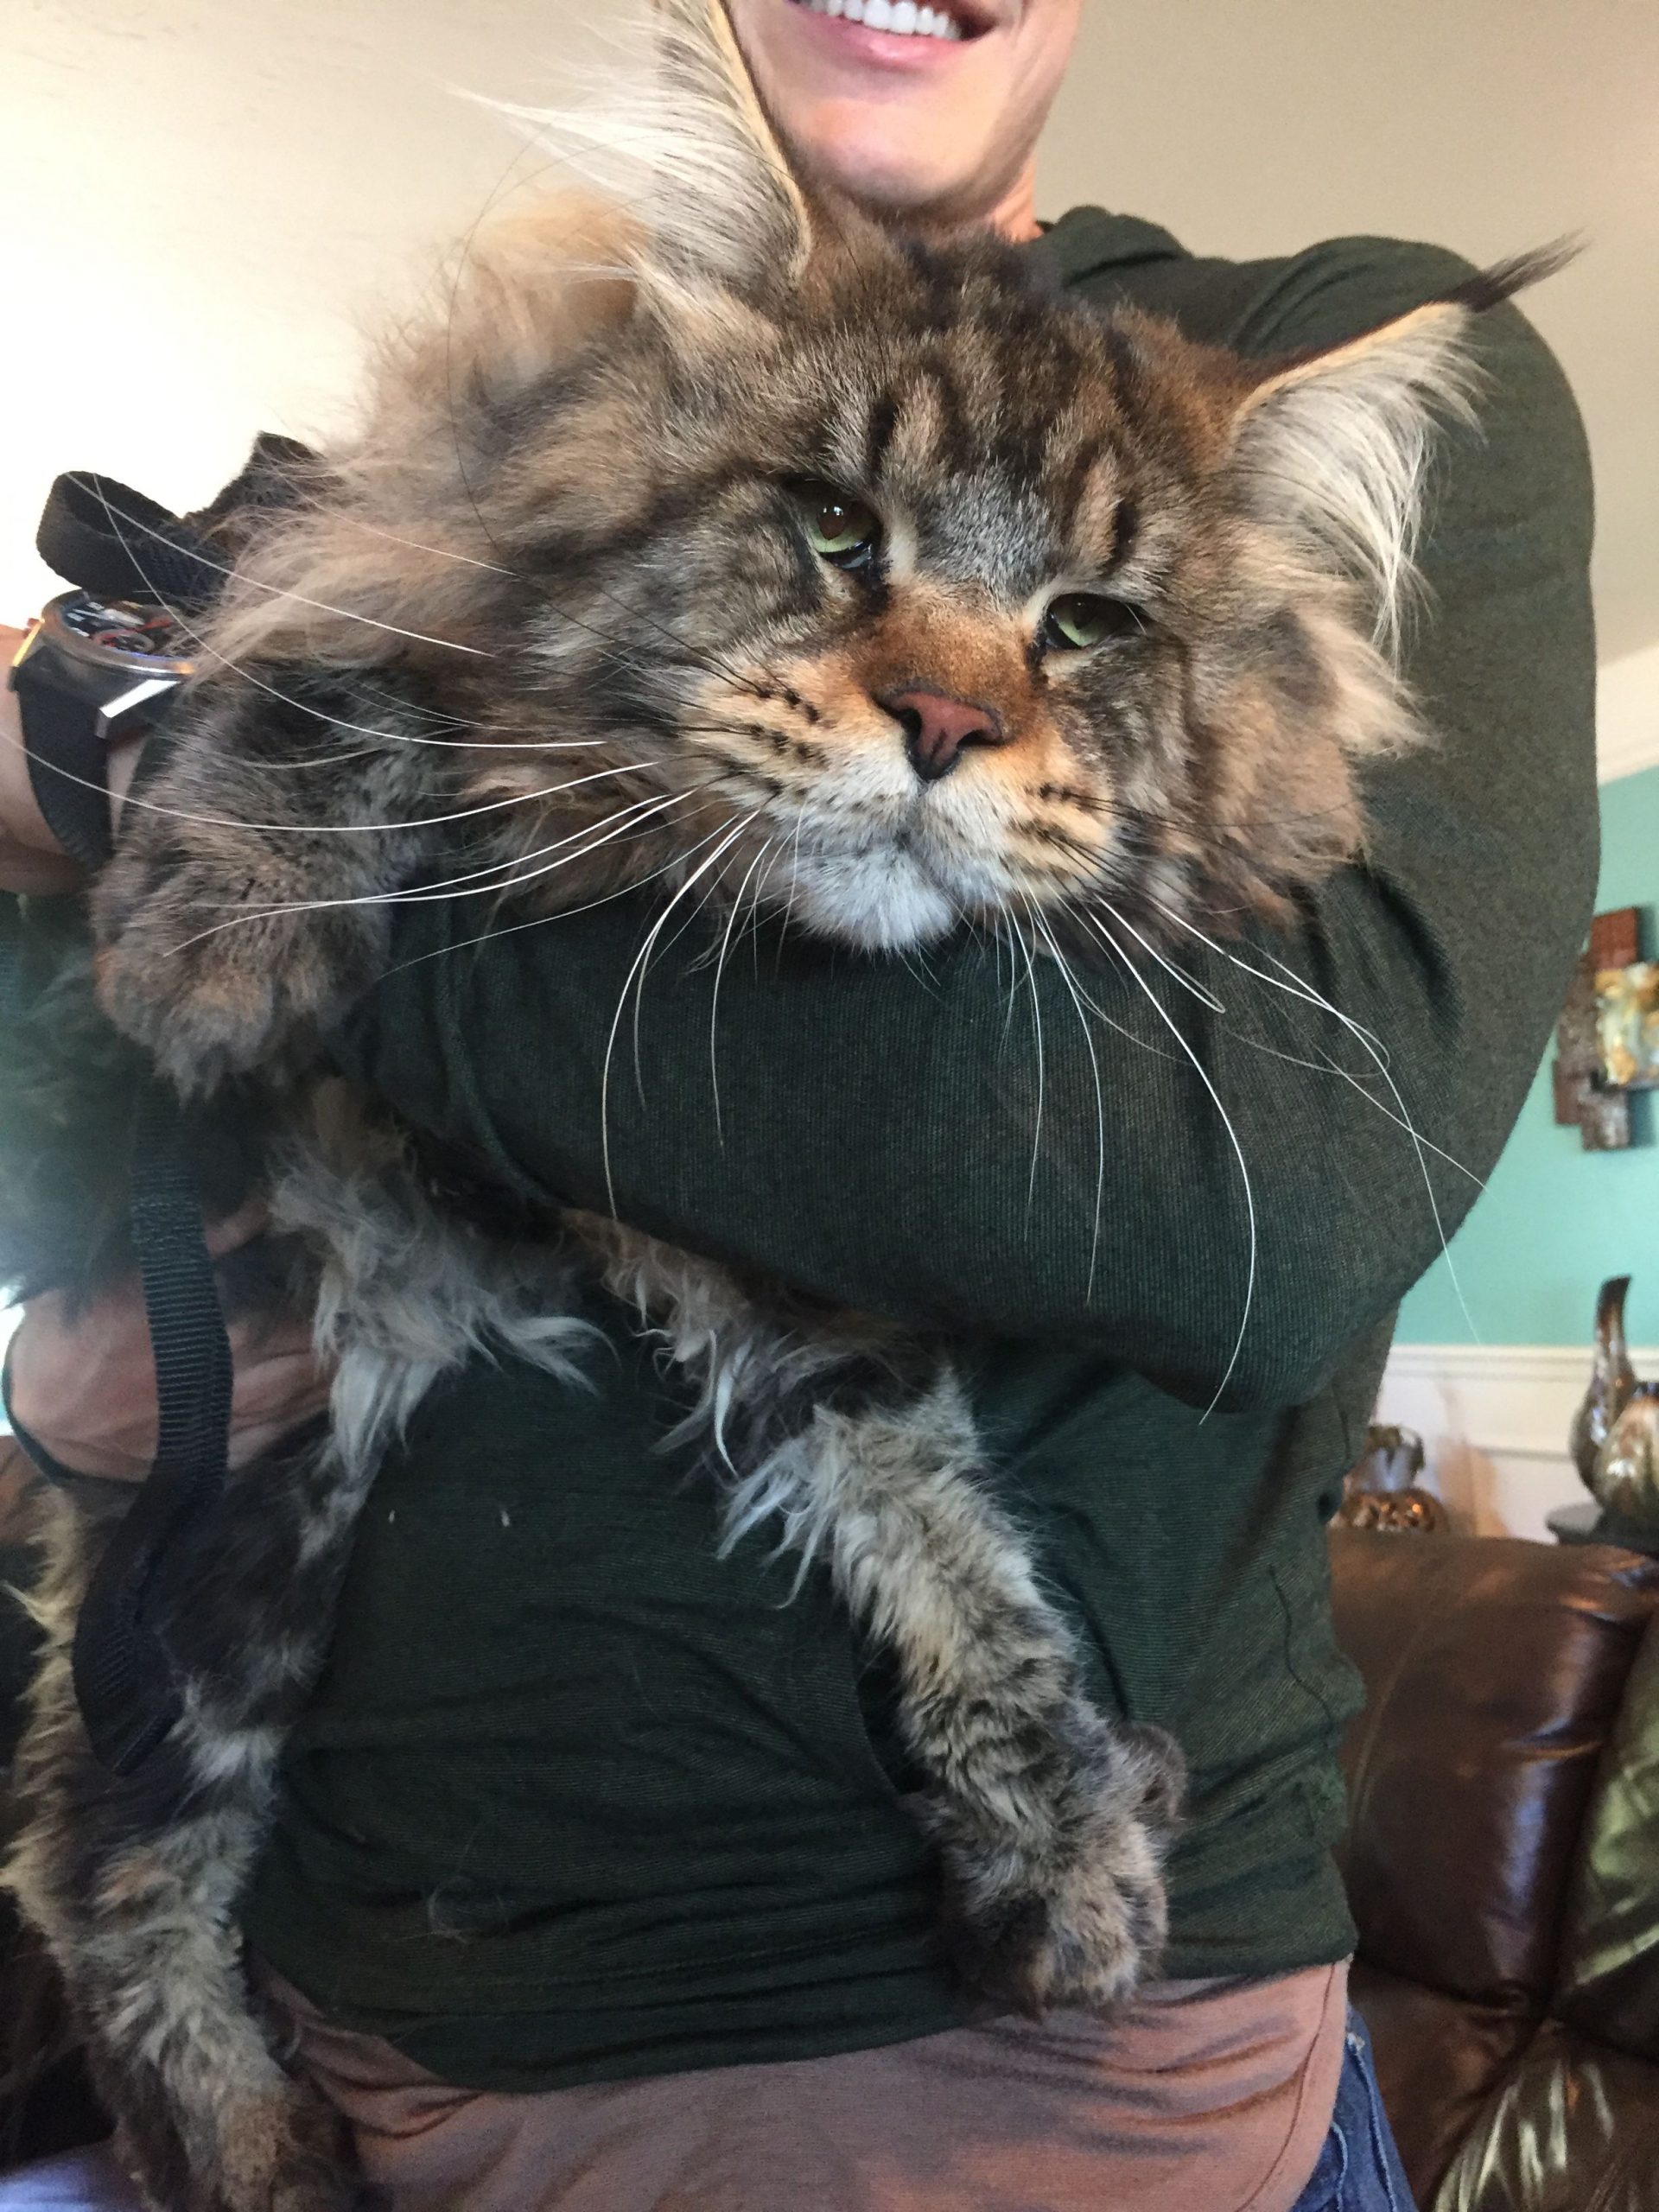 39+ Maine Coon Cats For Sale Near Me
 Gif